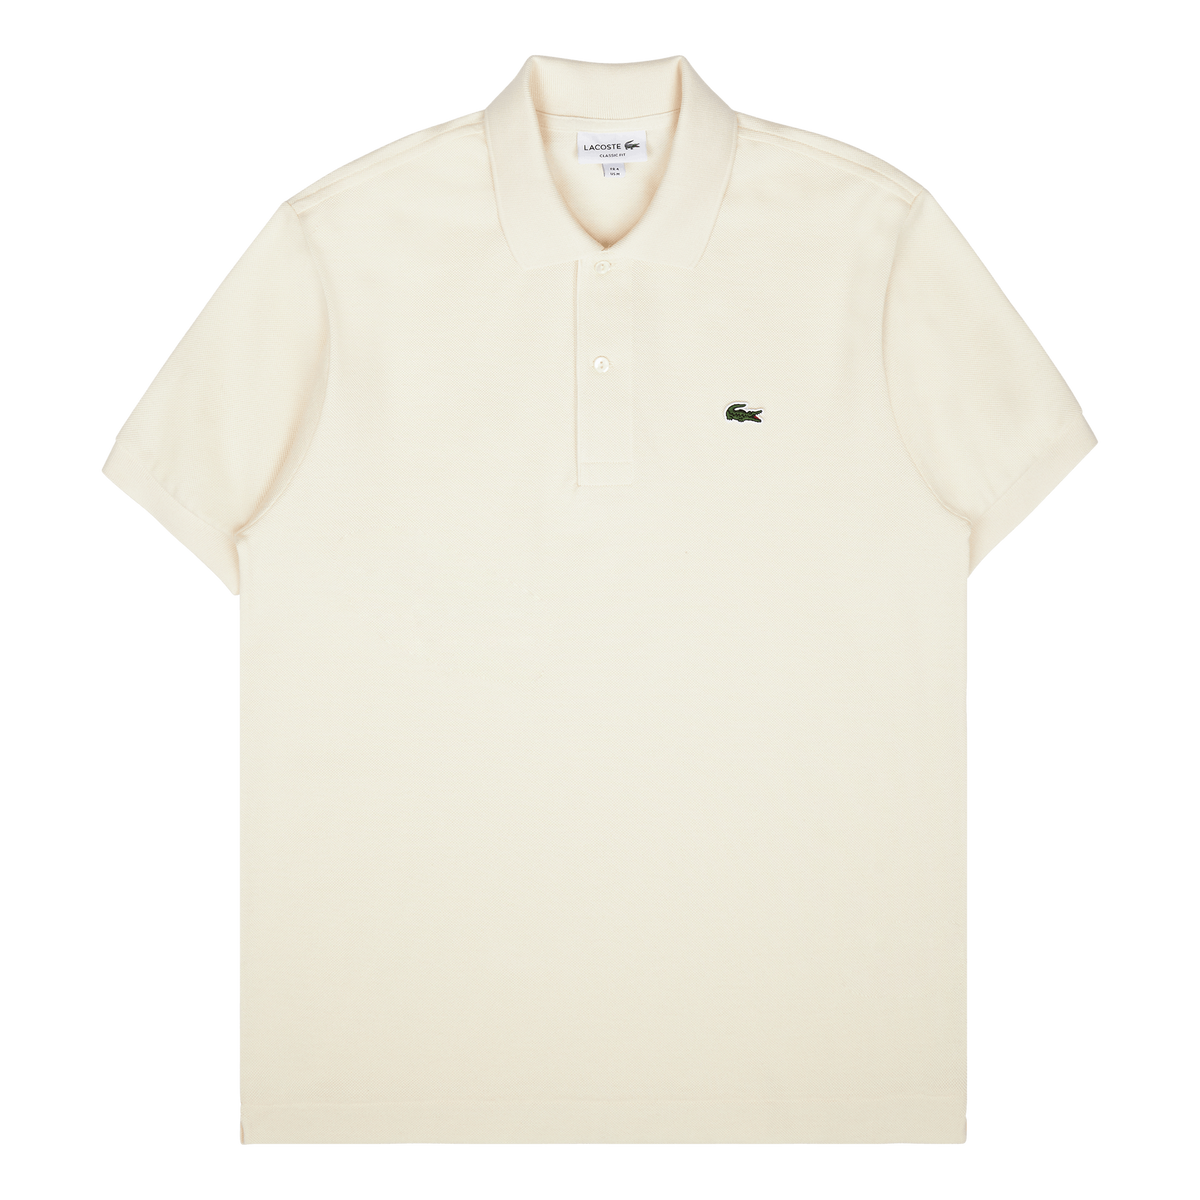 Classic Fit Polo Shirt Lapland